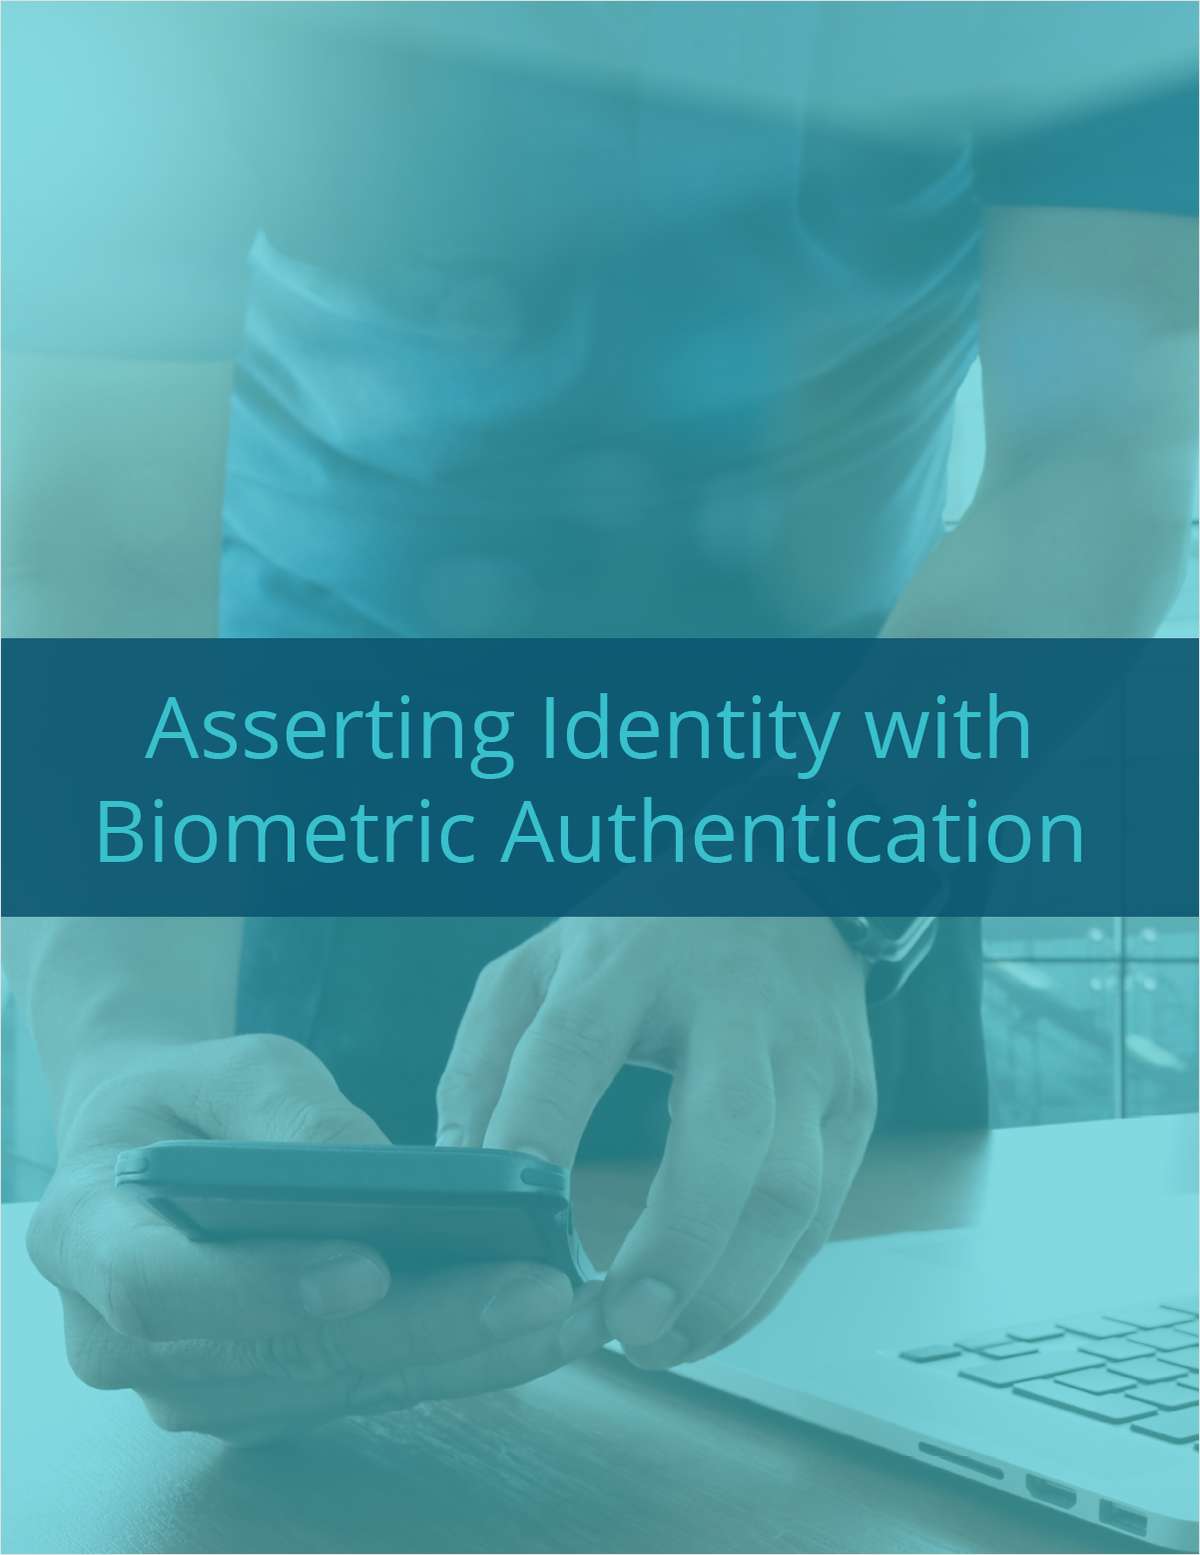 Asserting Identity with Biometric Authentication